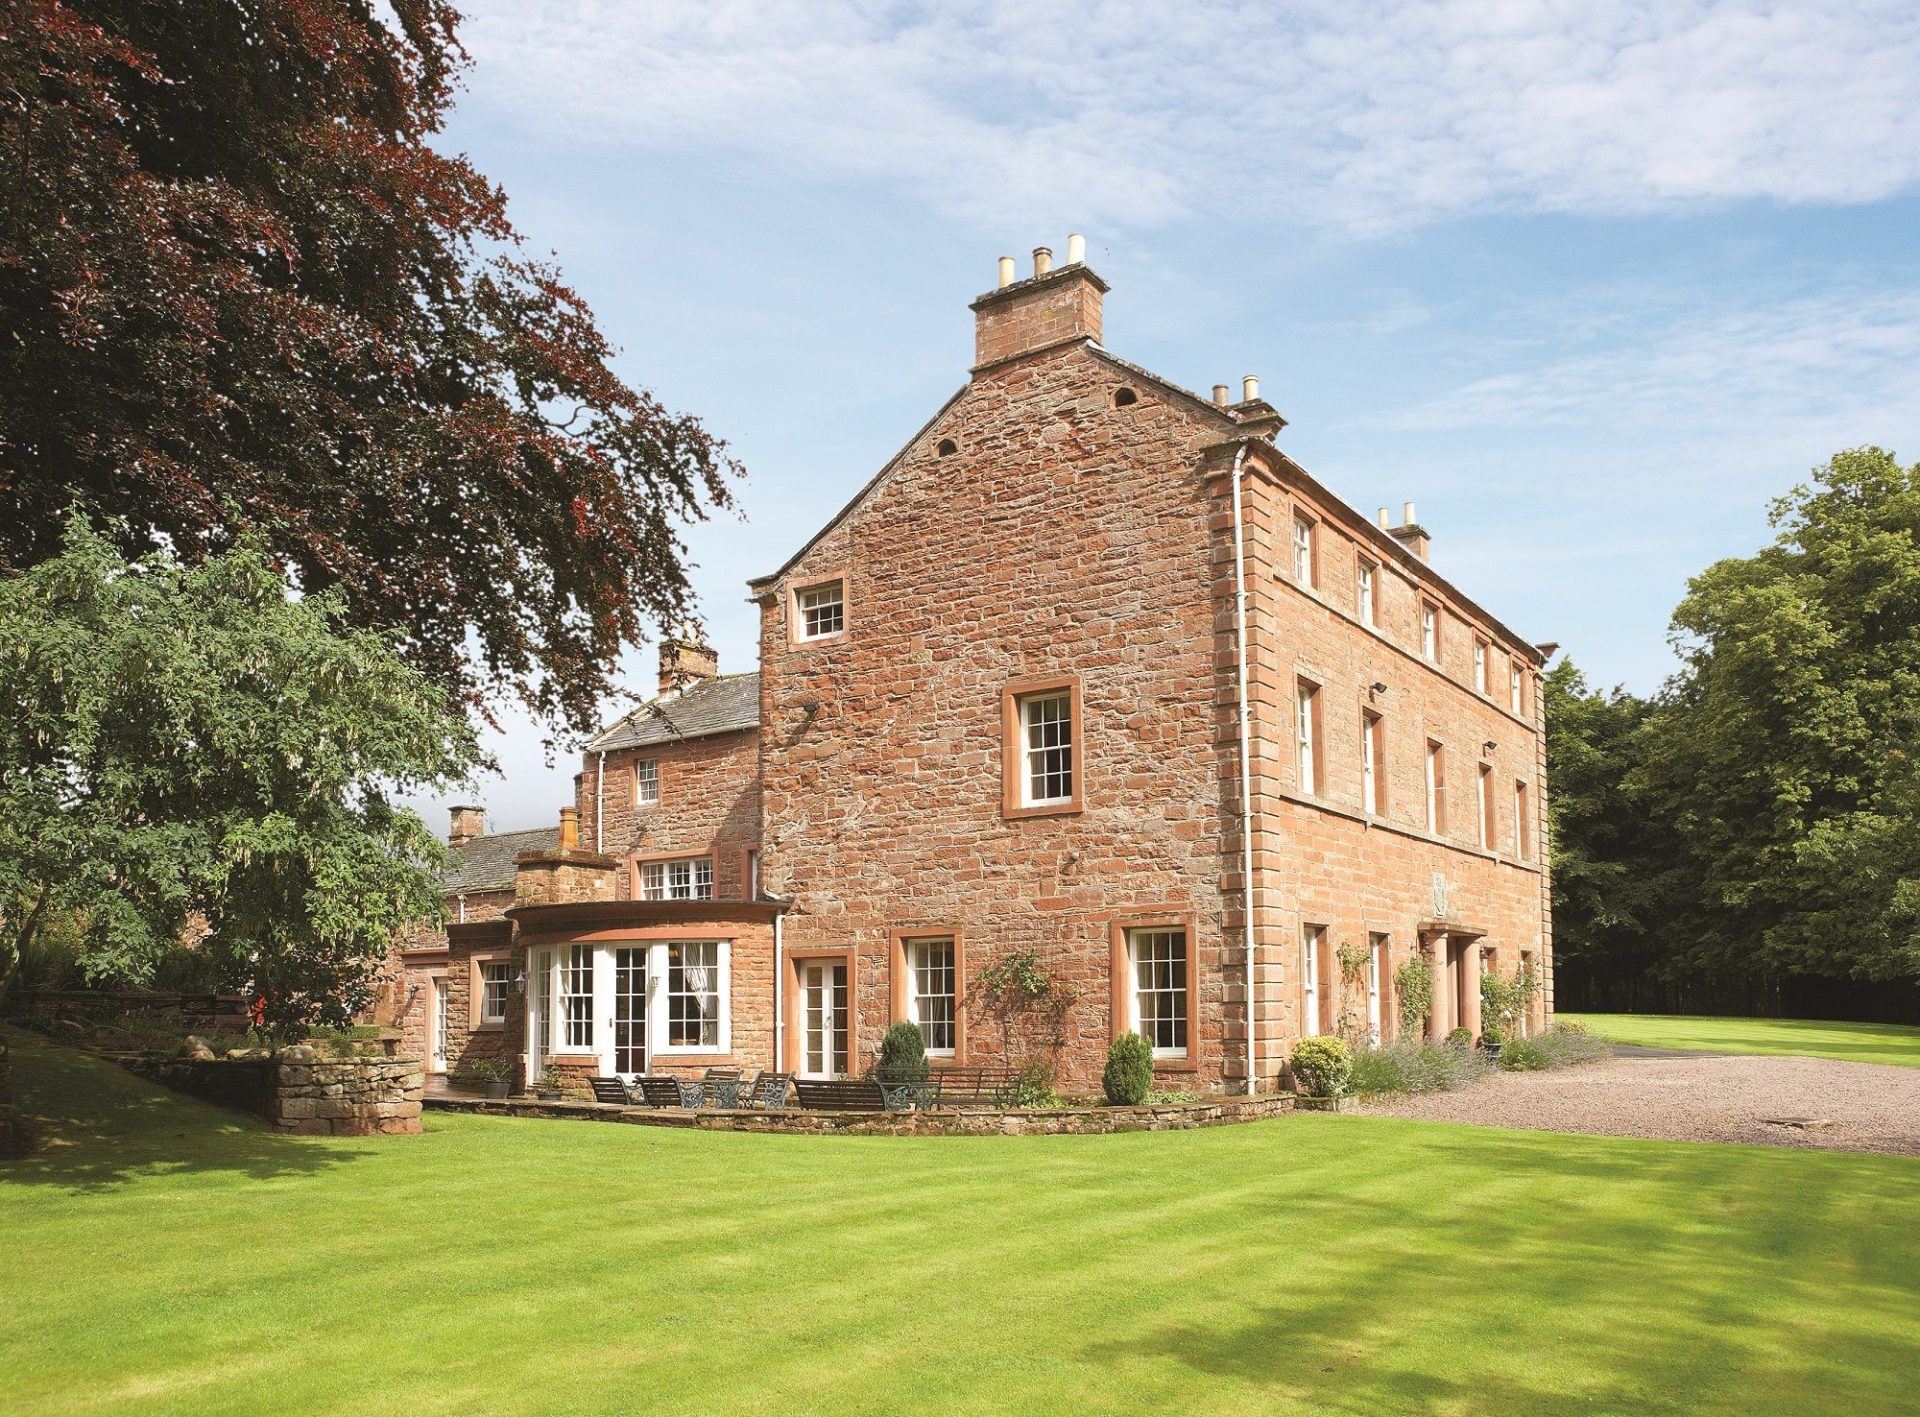 Melmerby Hall large self catering property for family holidays dogs welcome wedding venue corporate retreats exclusive use at The Rowley Estates